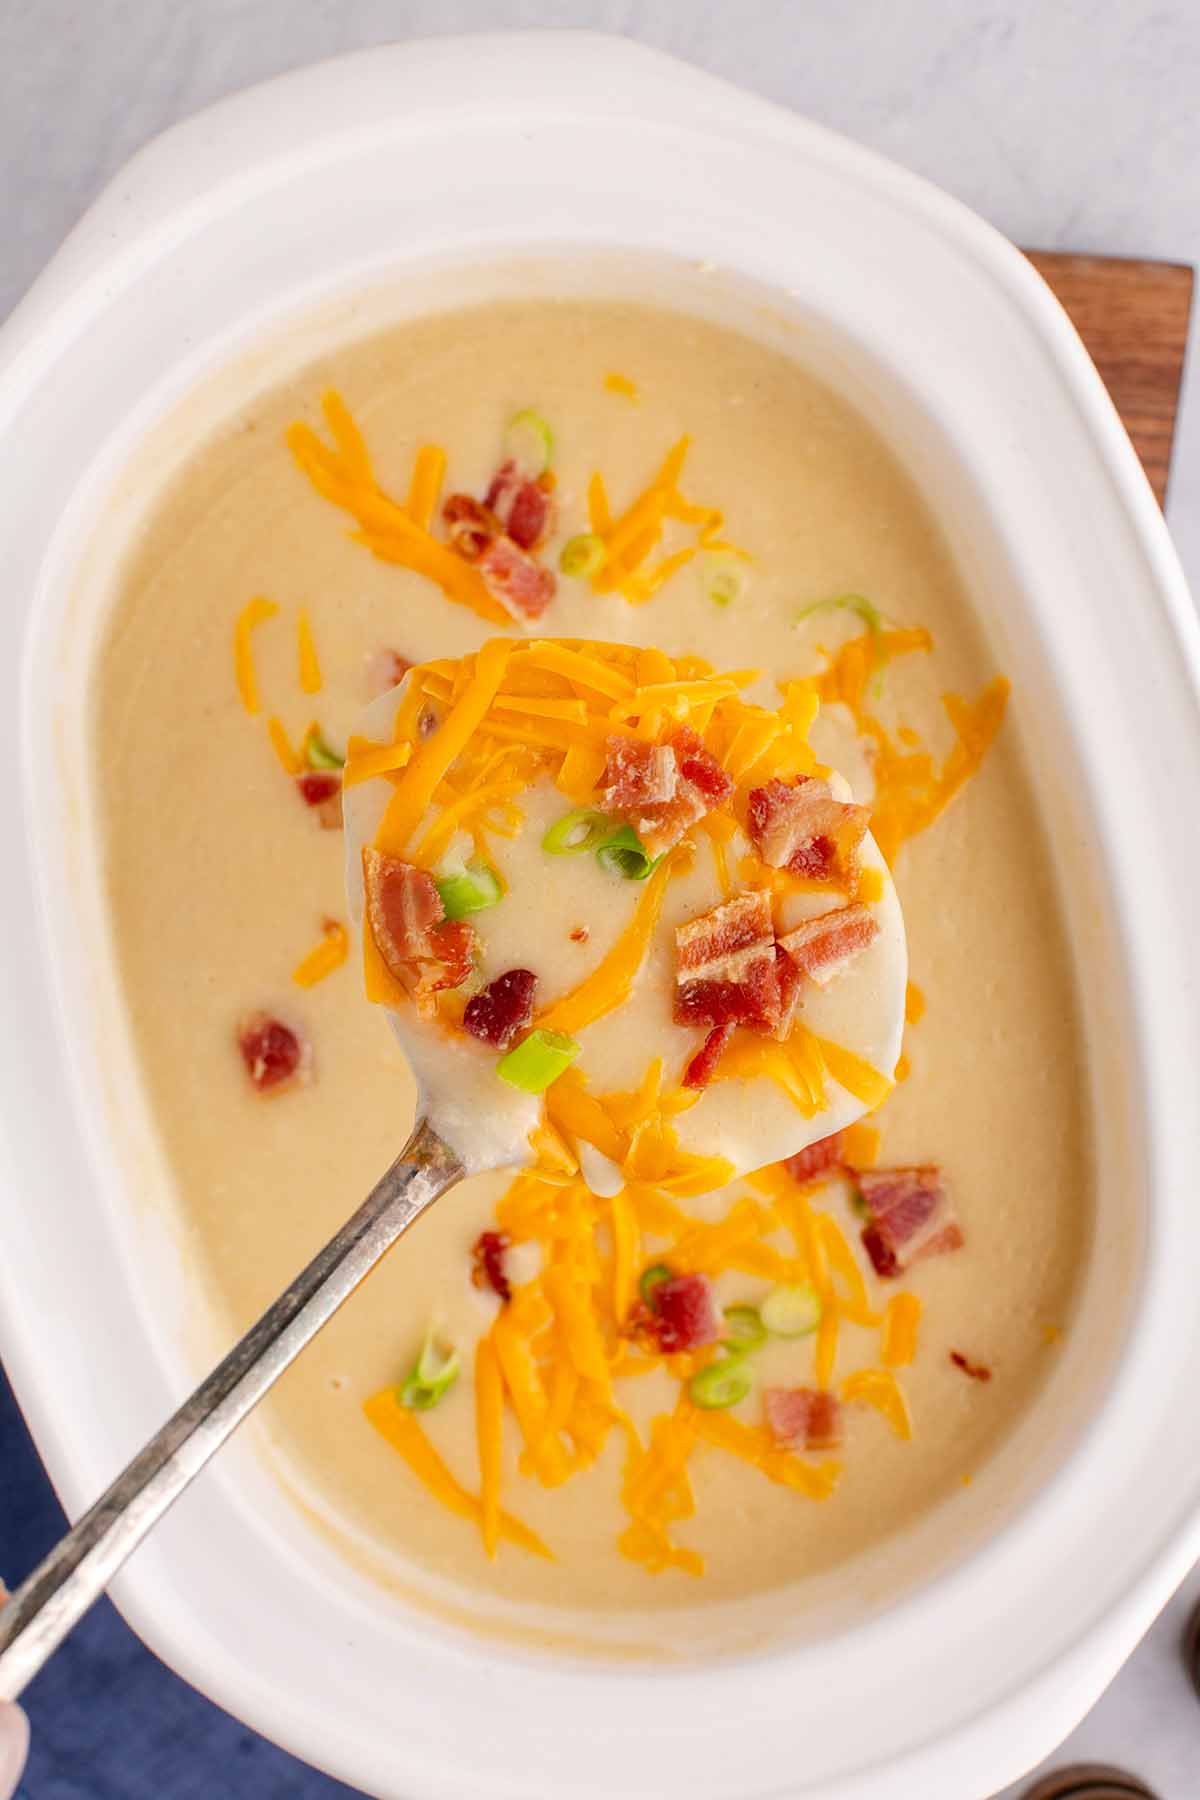 Overhead view of a ladle filled with potato soup topped with bacon bits, grated cheddar cheese, and sliced green onions over a white slow cooker filled with soup.